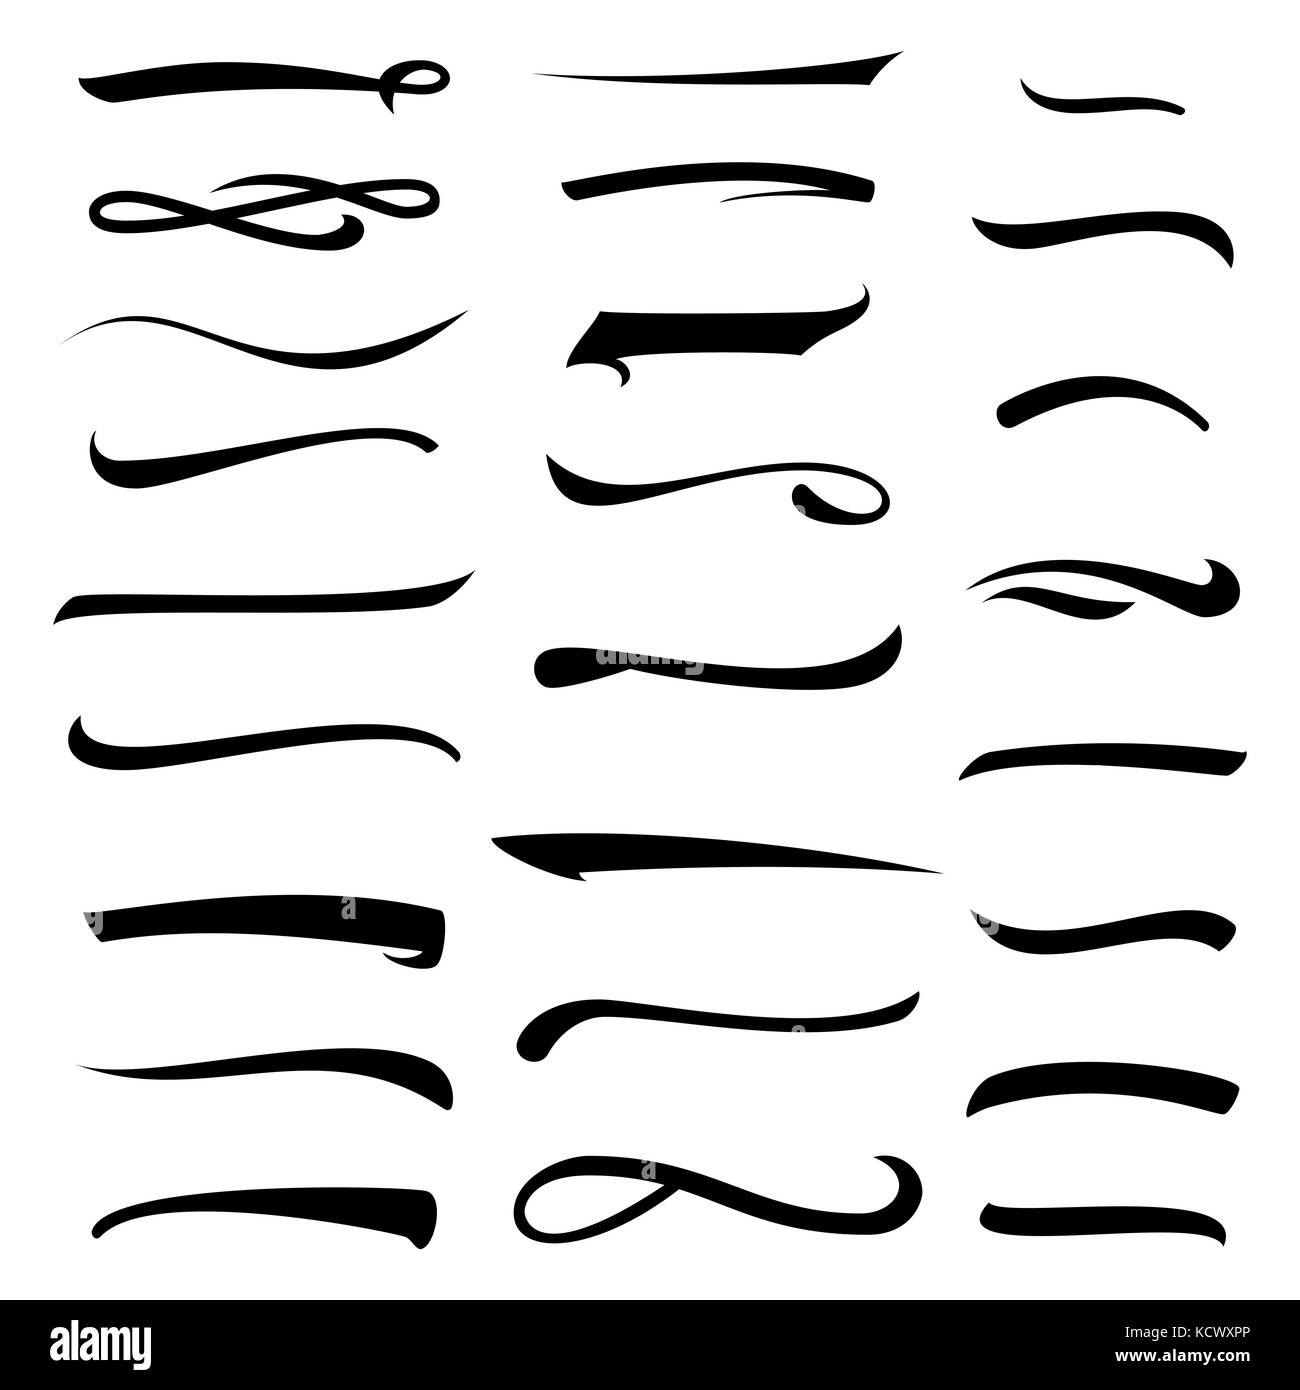 White Underlines Lettering Lines Set Isolated On Background. Typographic Design. Elements For Housewarming Posters, Greeting Cards, Home Decorations, Business Presentation. Vector Illustration Handwritten Mark. Stock Vector